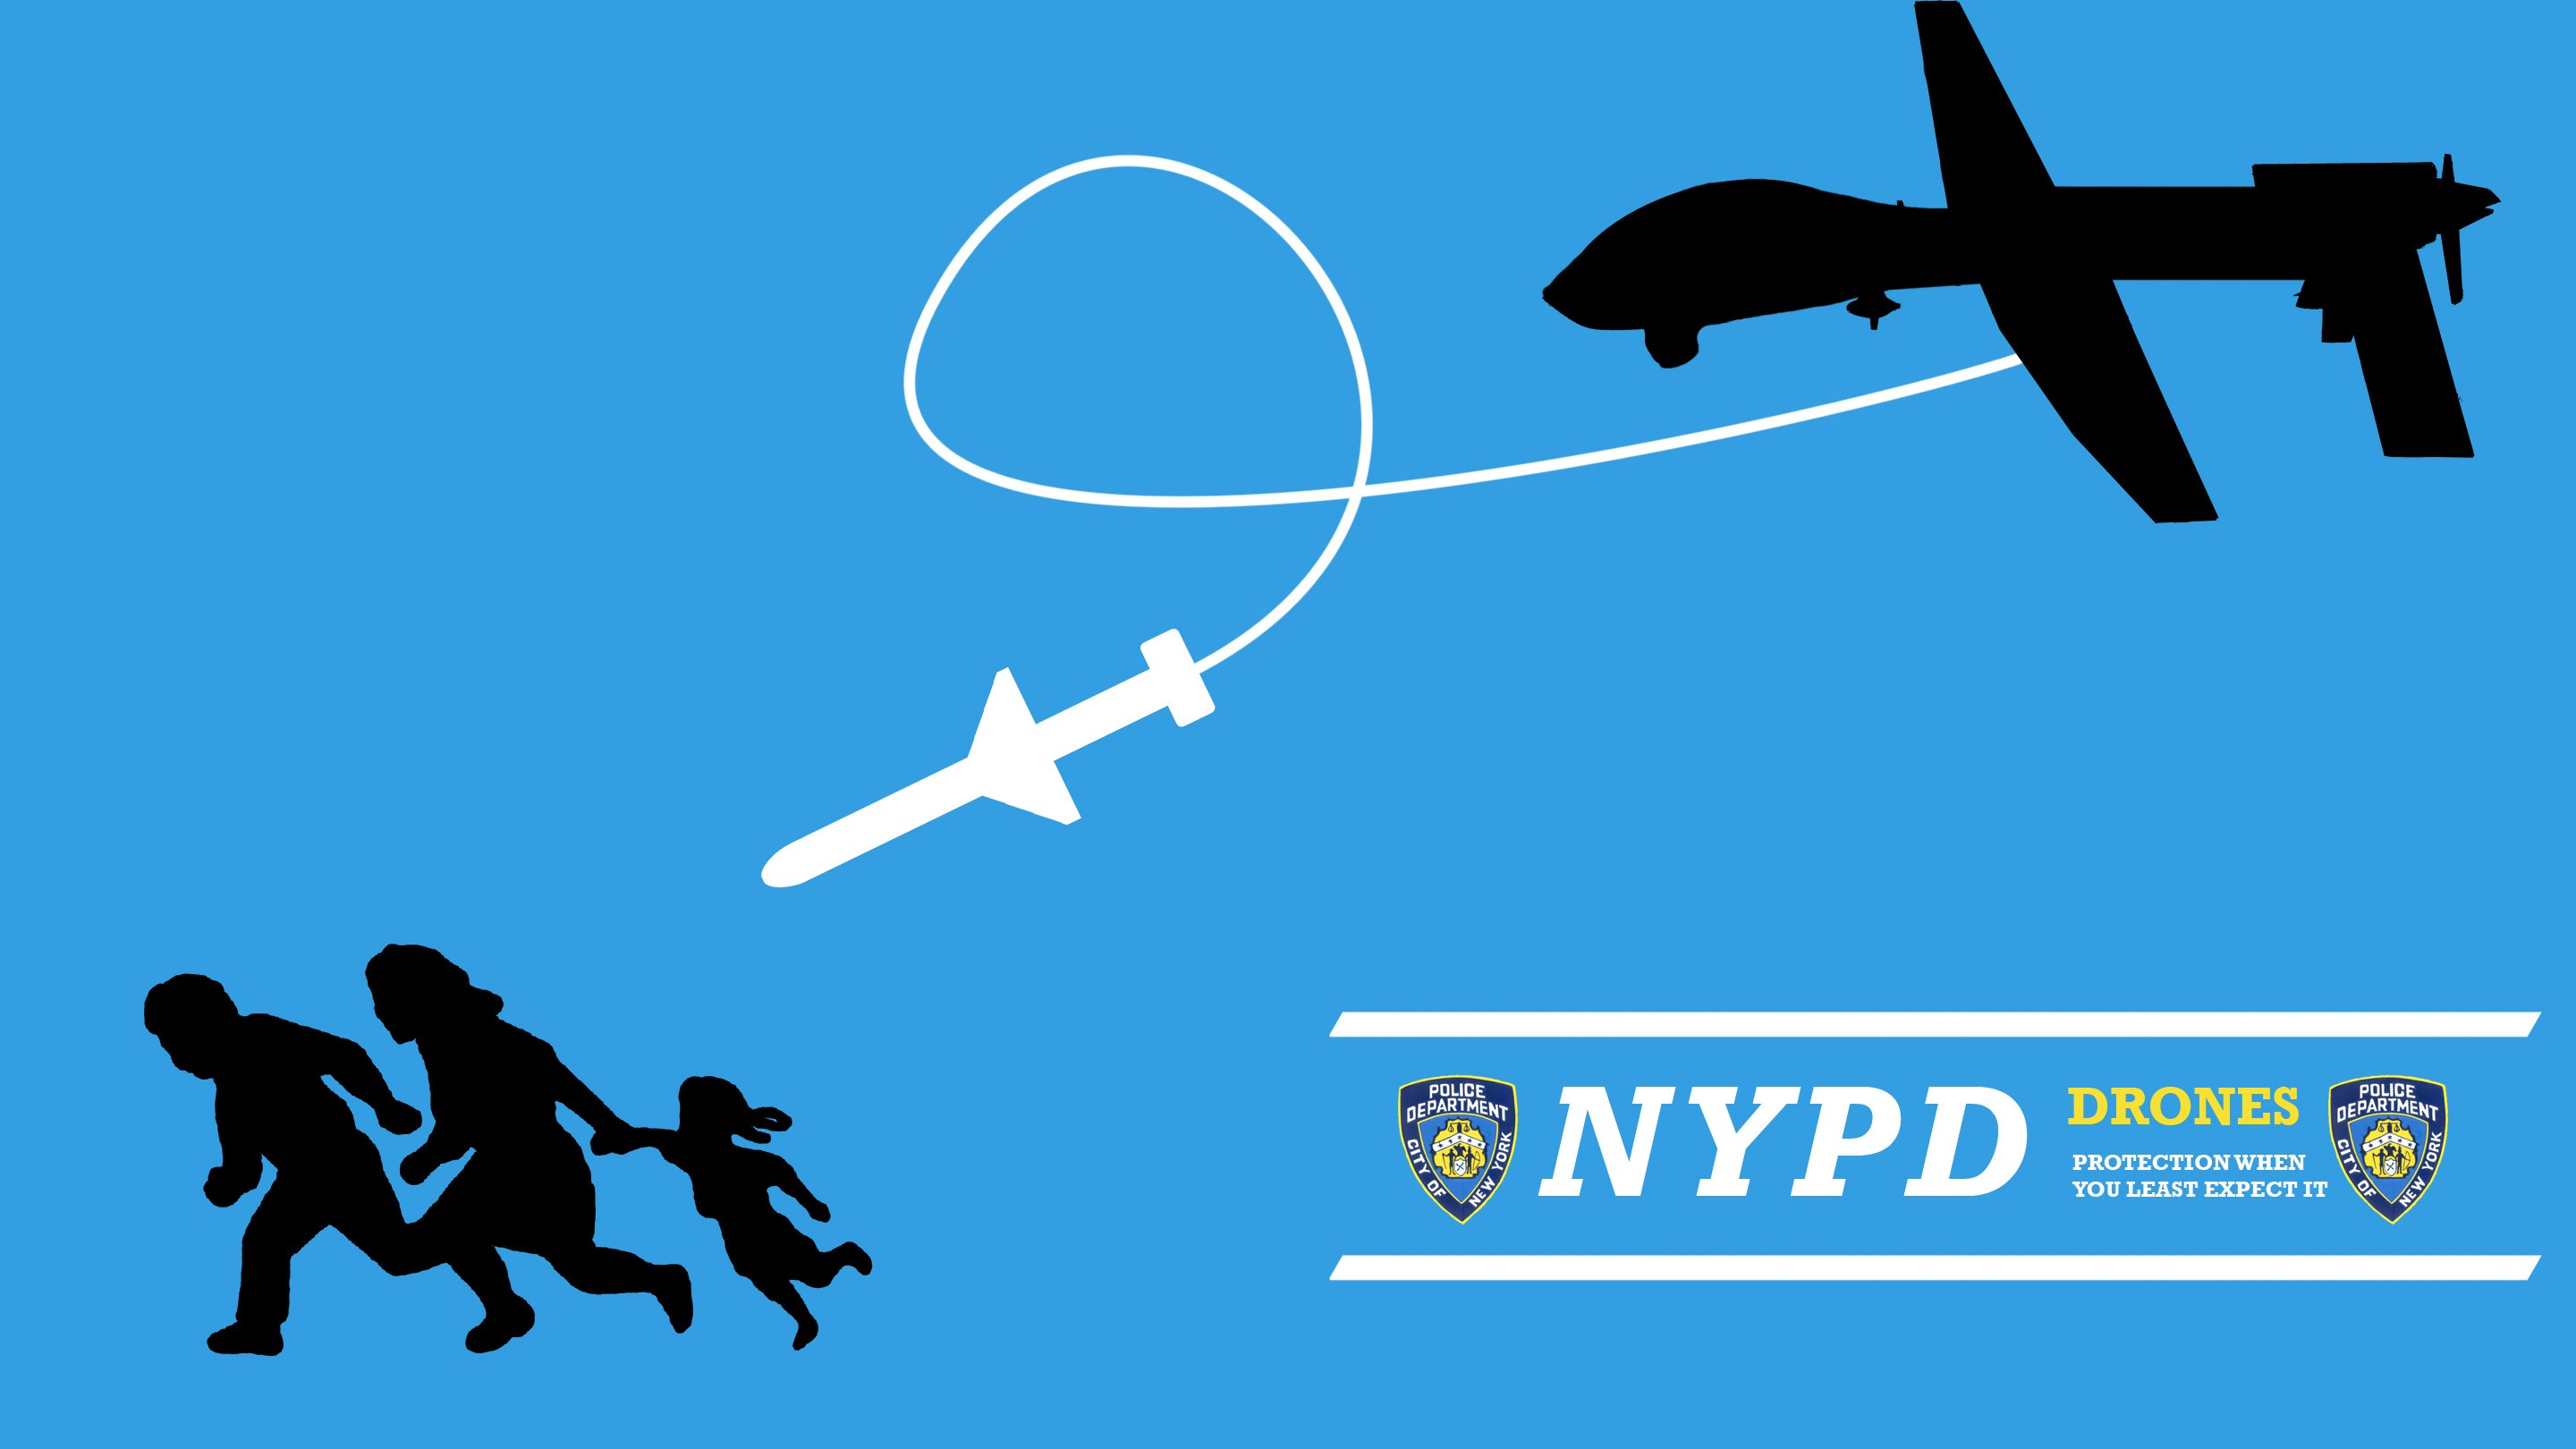 NYPD Drone Poster, kiss your rights and freedoms goodbye!